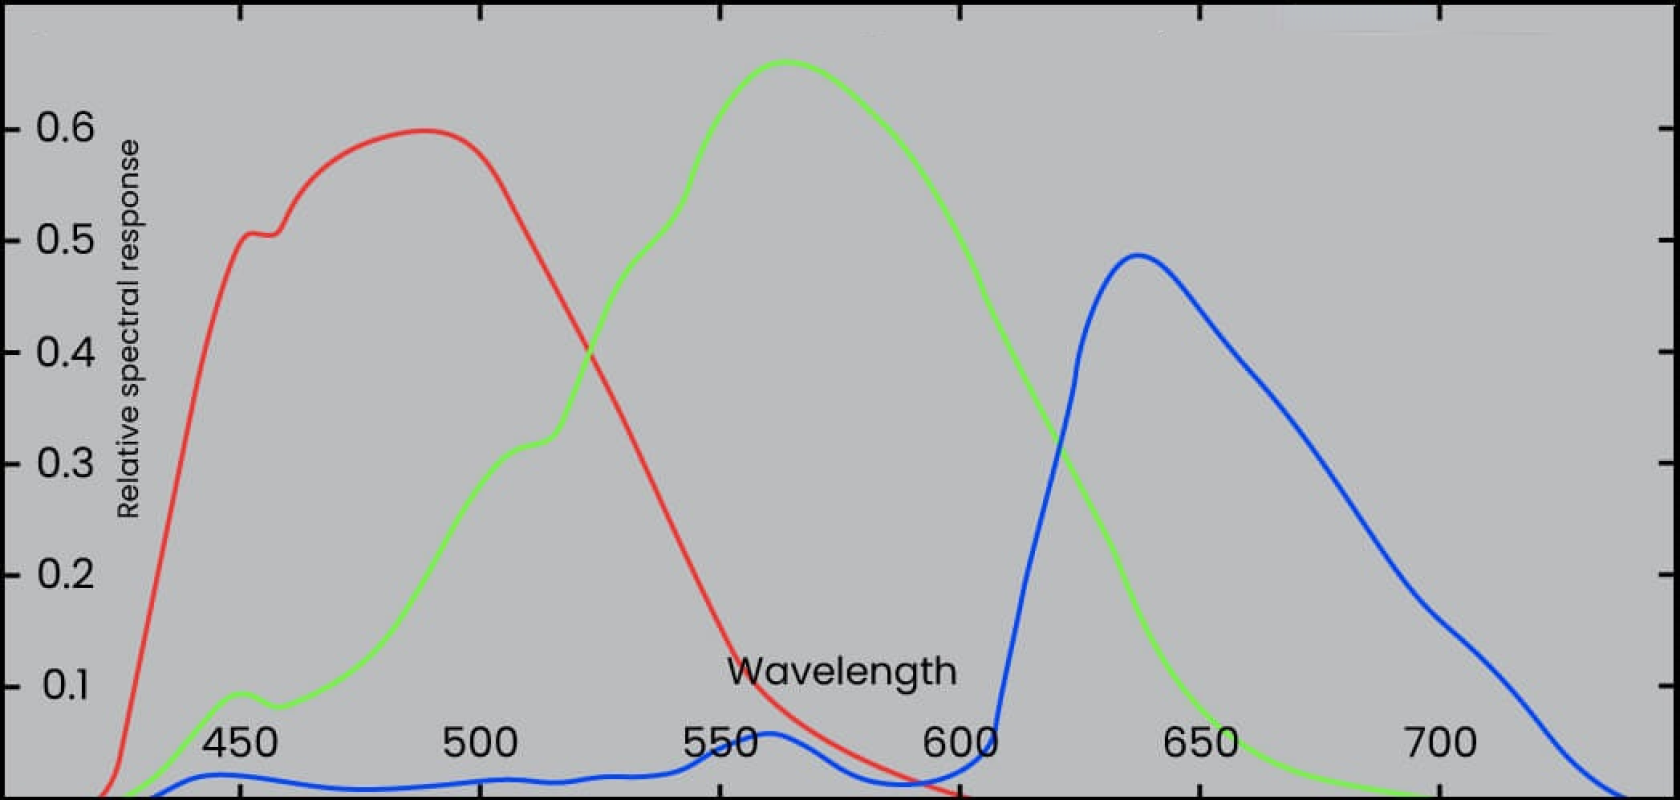 The range of wavelengths an image sensor can detect is determined by its spectral sensitivity